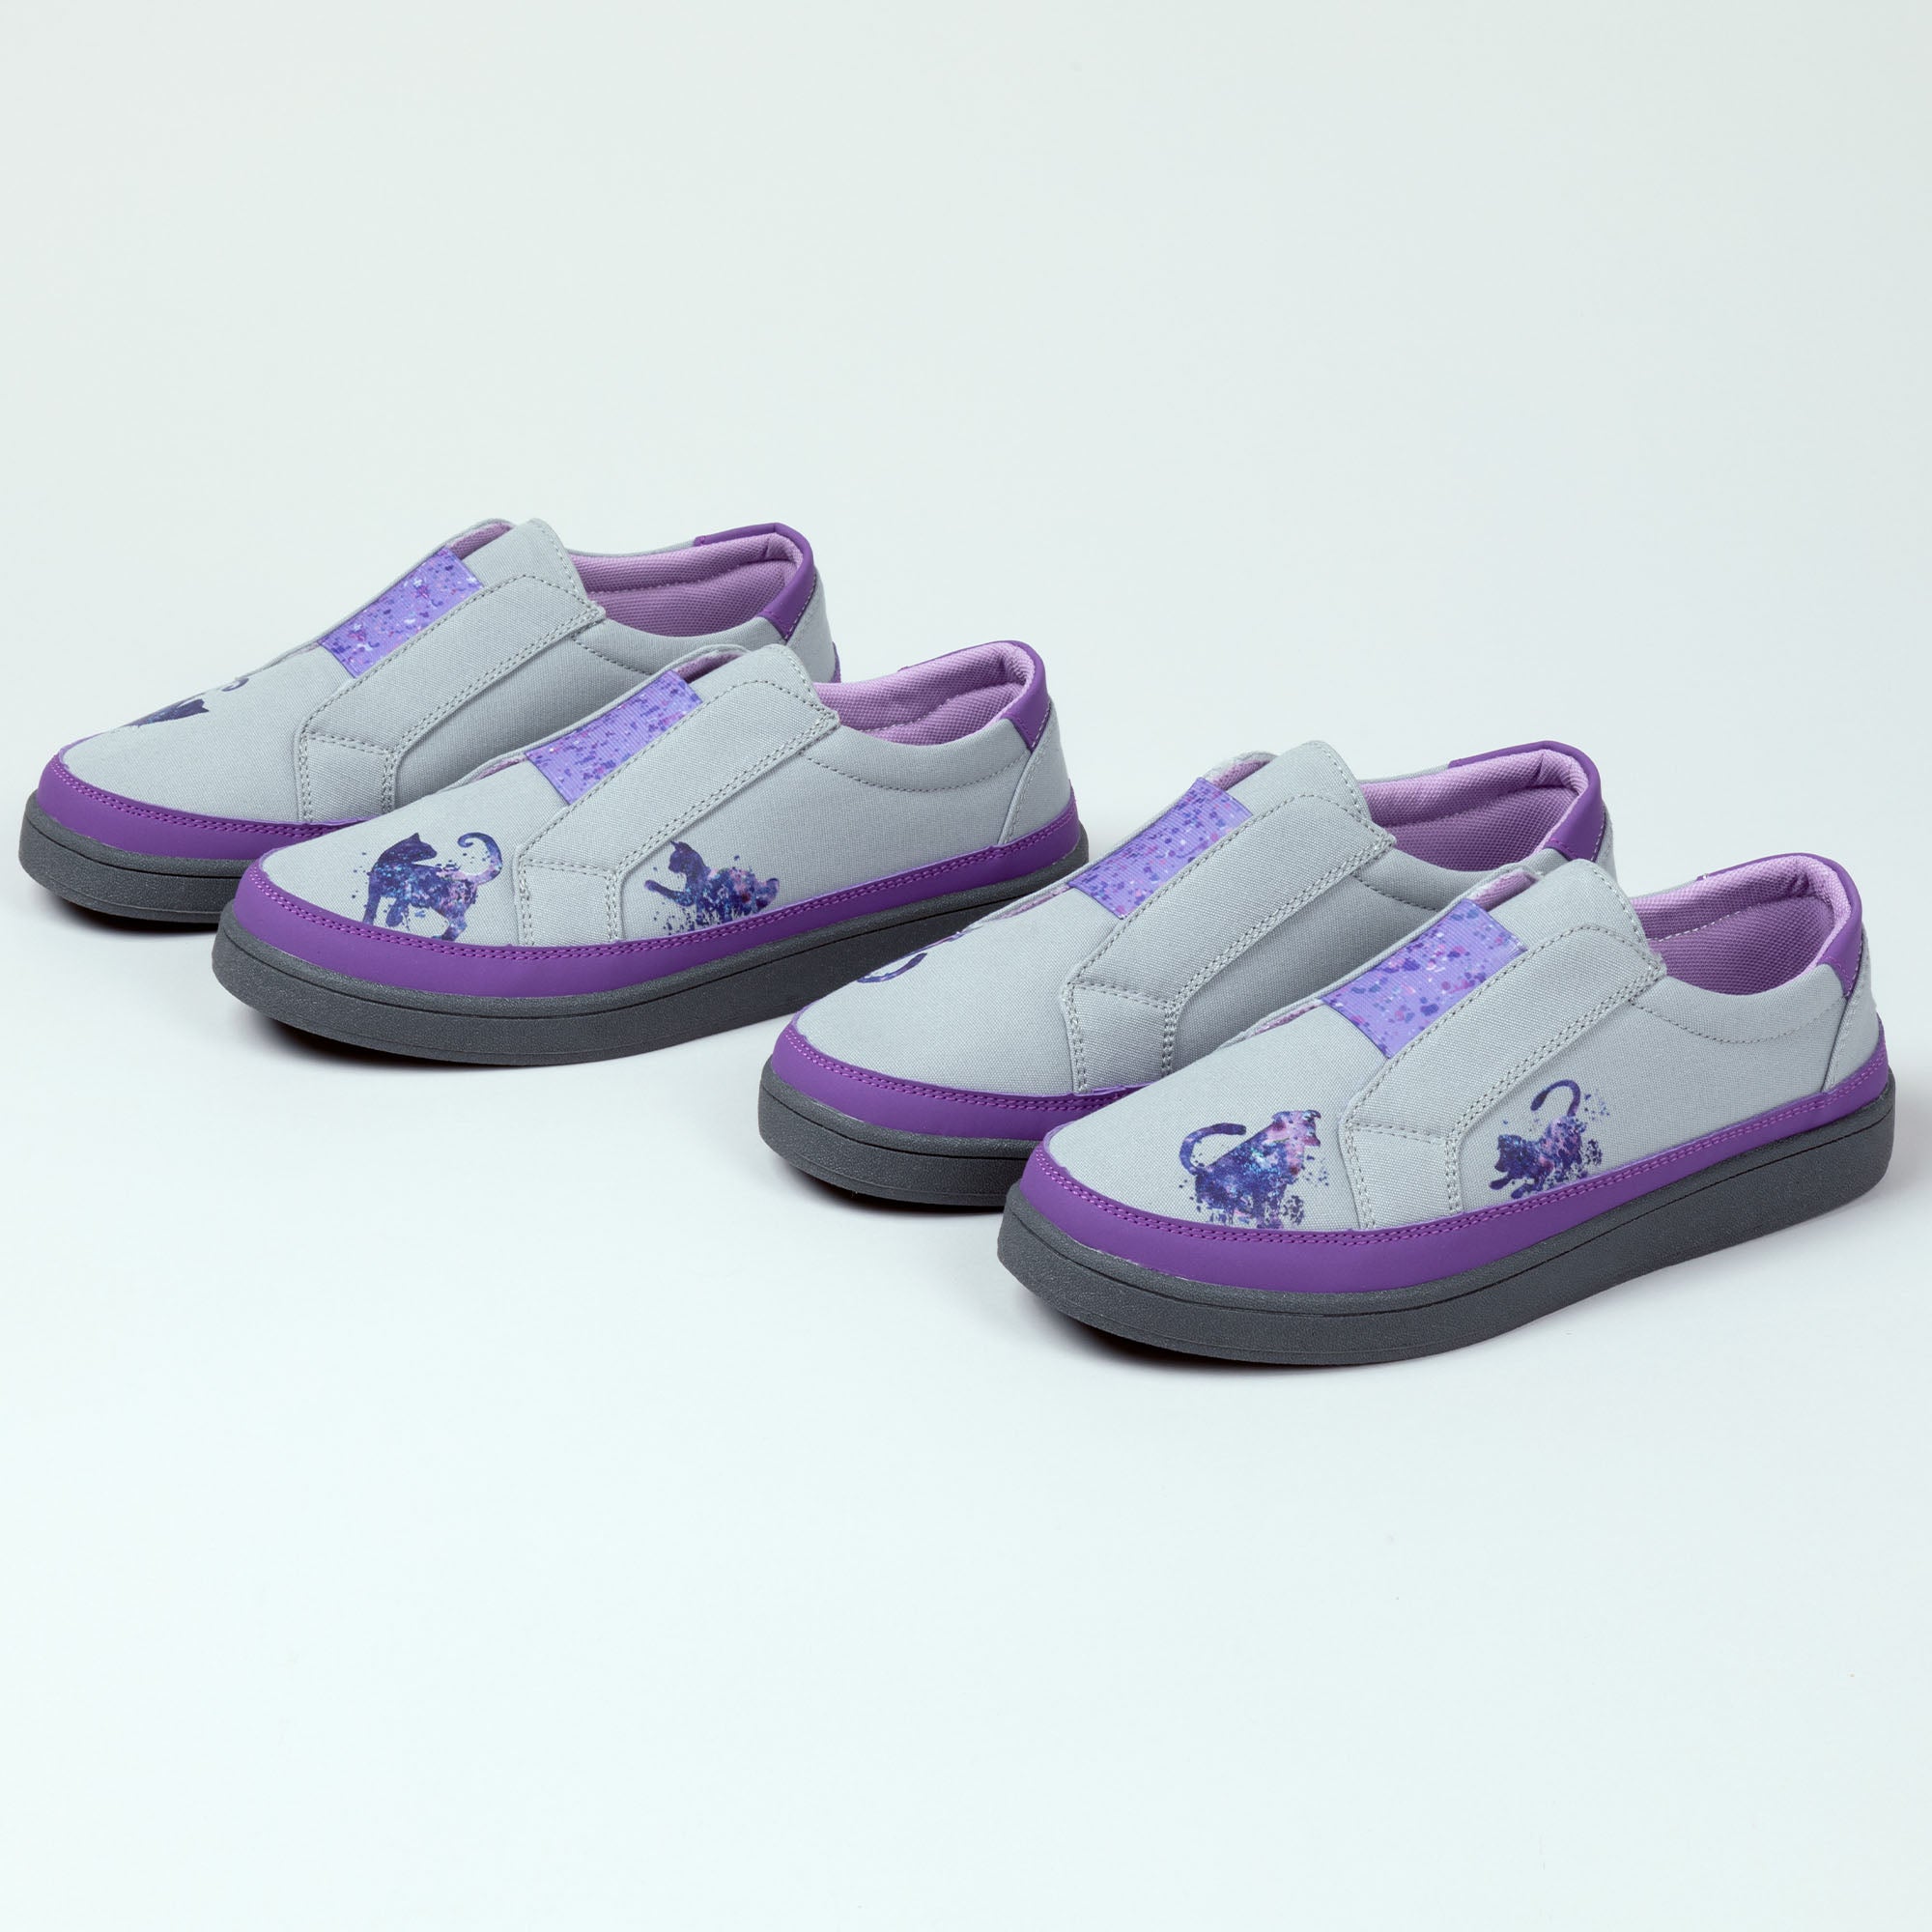 Playful Pets Slip-On Canvas Sneakers - Dog - 10